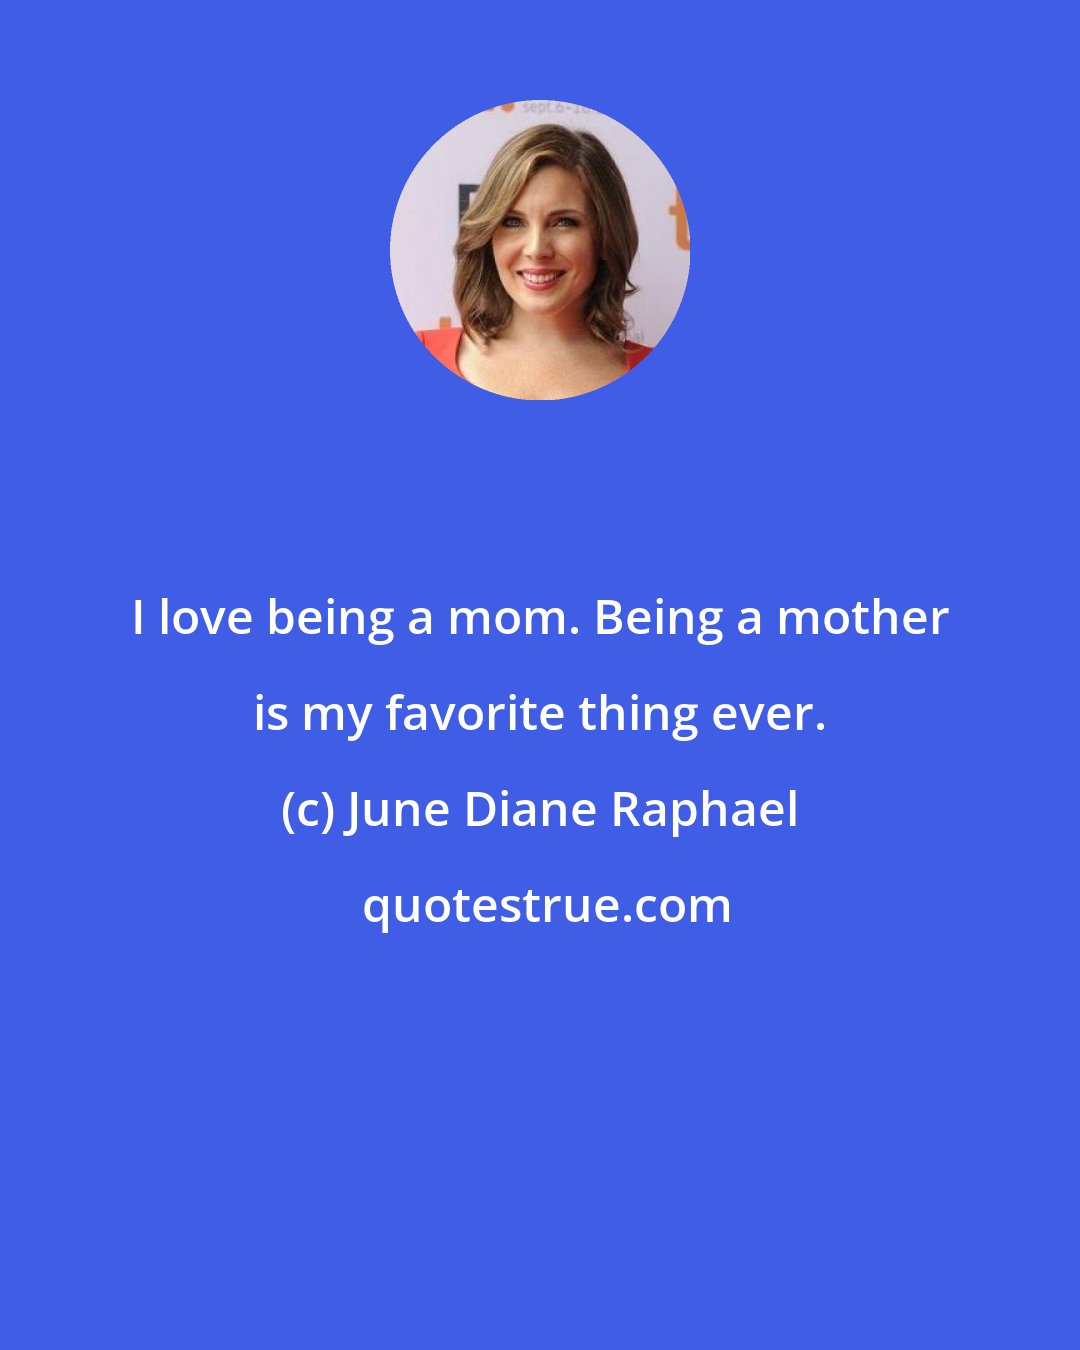 June Diane Raphael: I love being a mom. Being a mother is my favorite thing ever.